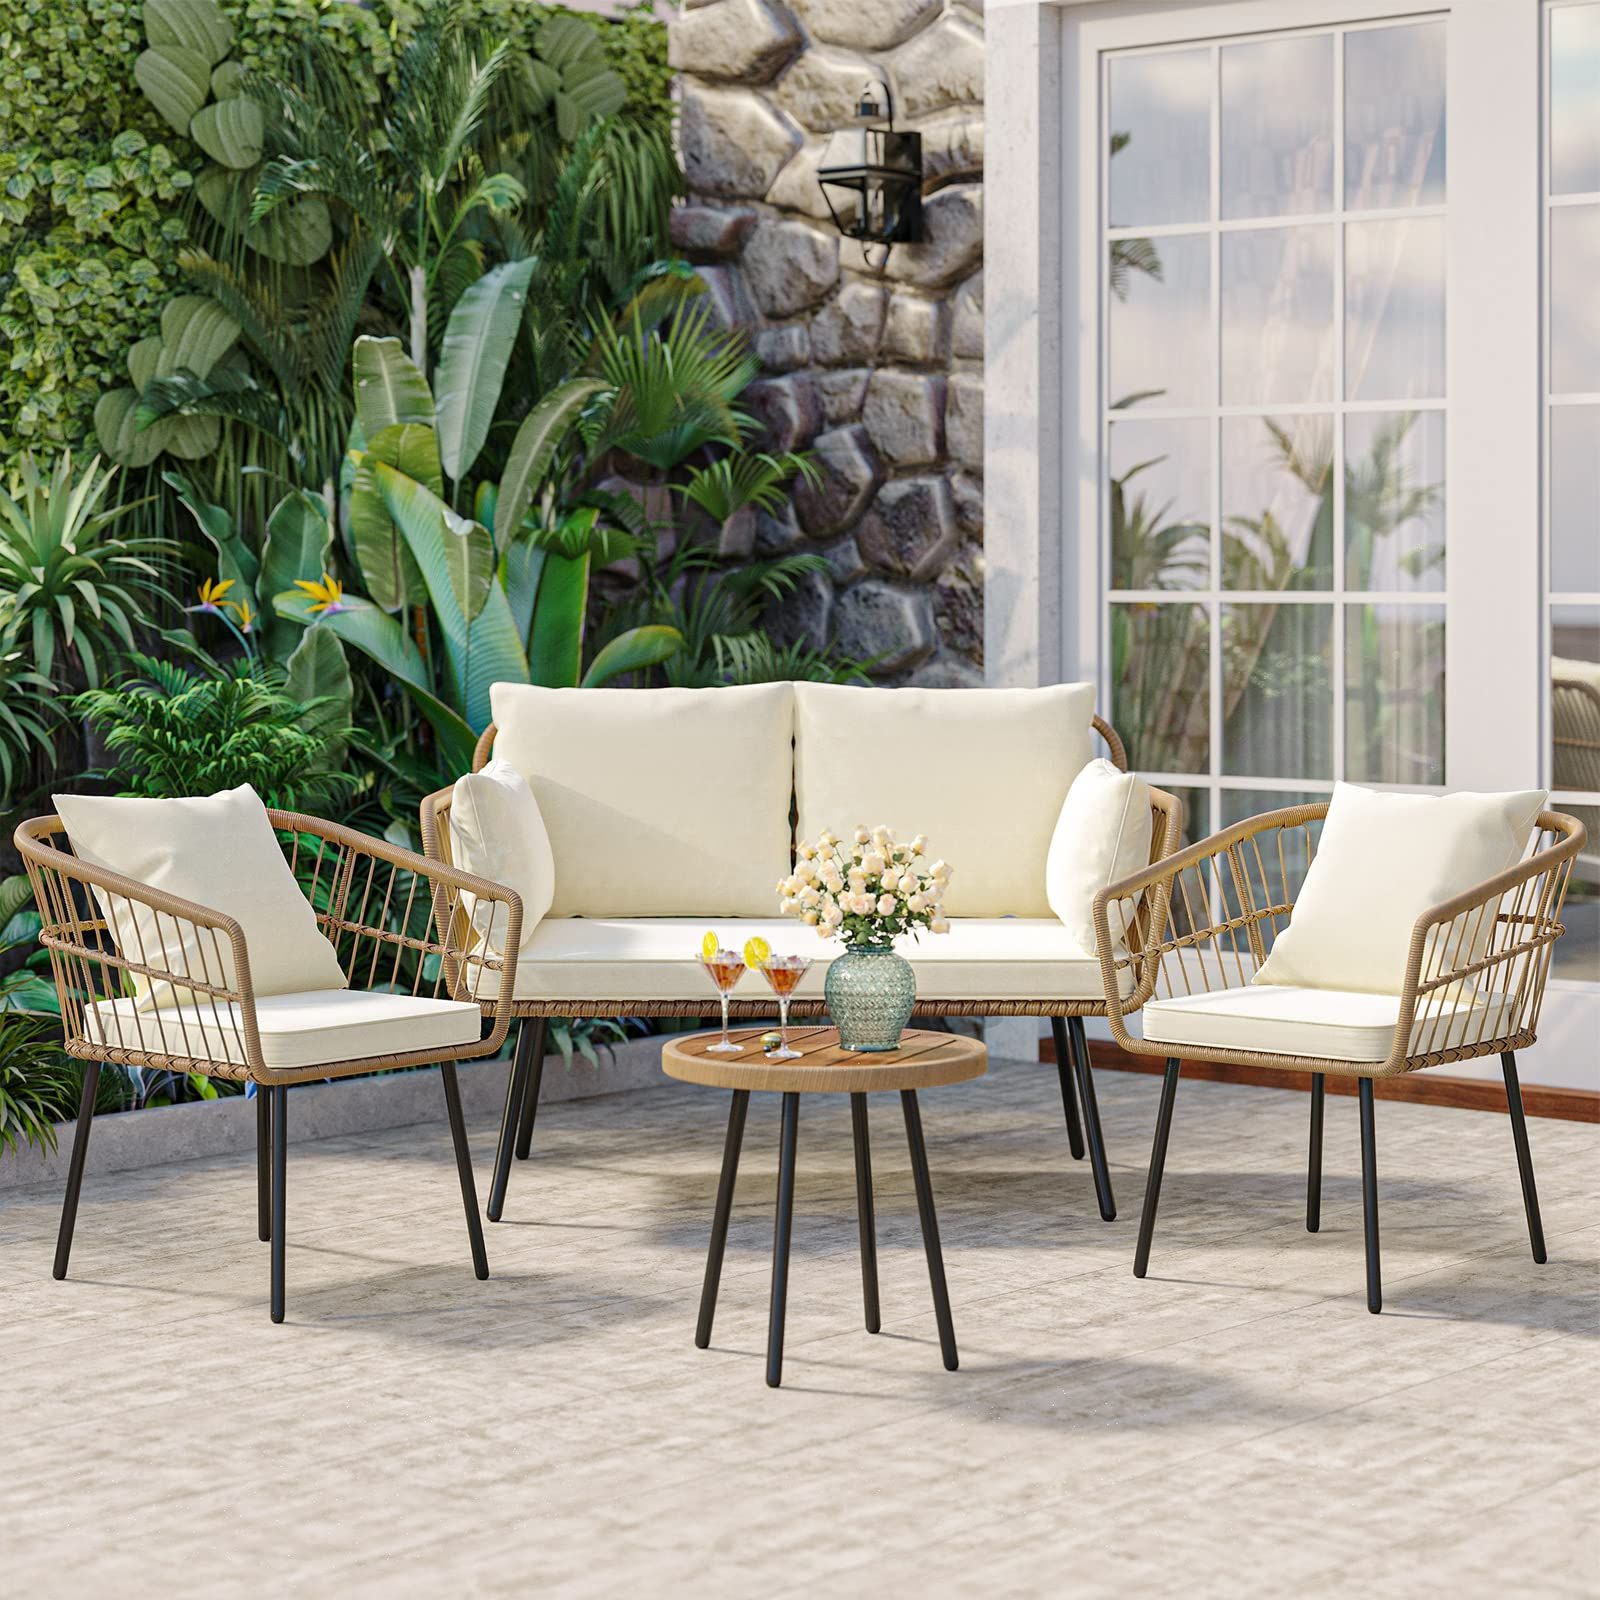 Well Known Amazon: Yitahome 4 Pieces Patio Furniture Set, Wicker Balcony Bistro Set,  Outdoor All Weather Rattan Conversation Set With Loveseat Chairs Table Soft  Cushions For Backyard, Pool, Deck, Garden – Beige : Patio, Lawn Intended For Patio Furniture Wicker Outdoor Bistro Set (Photo 3 of 15)